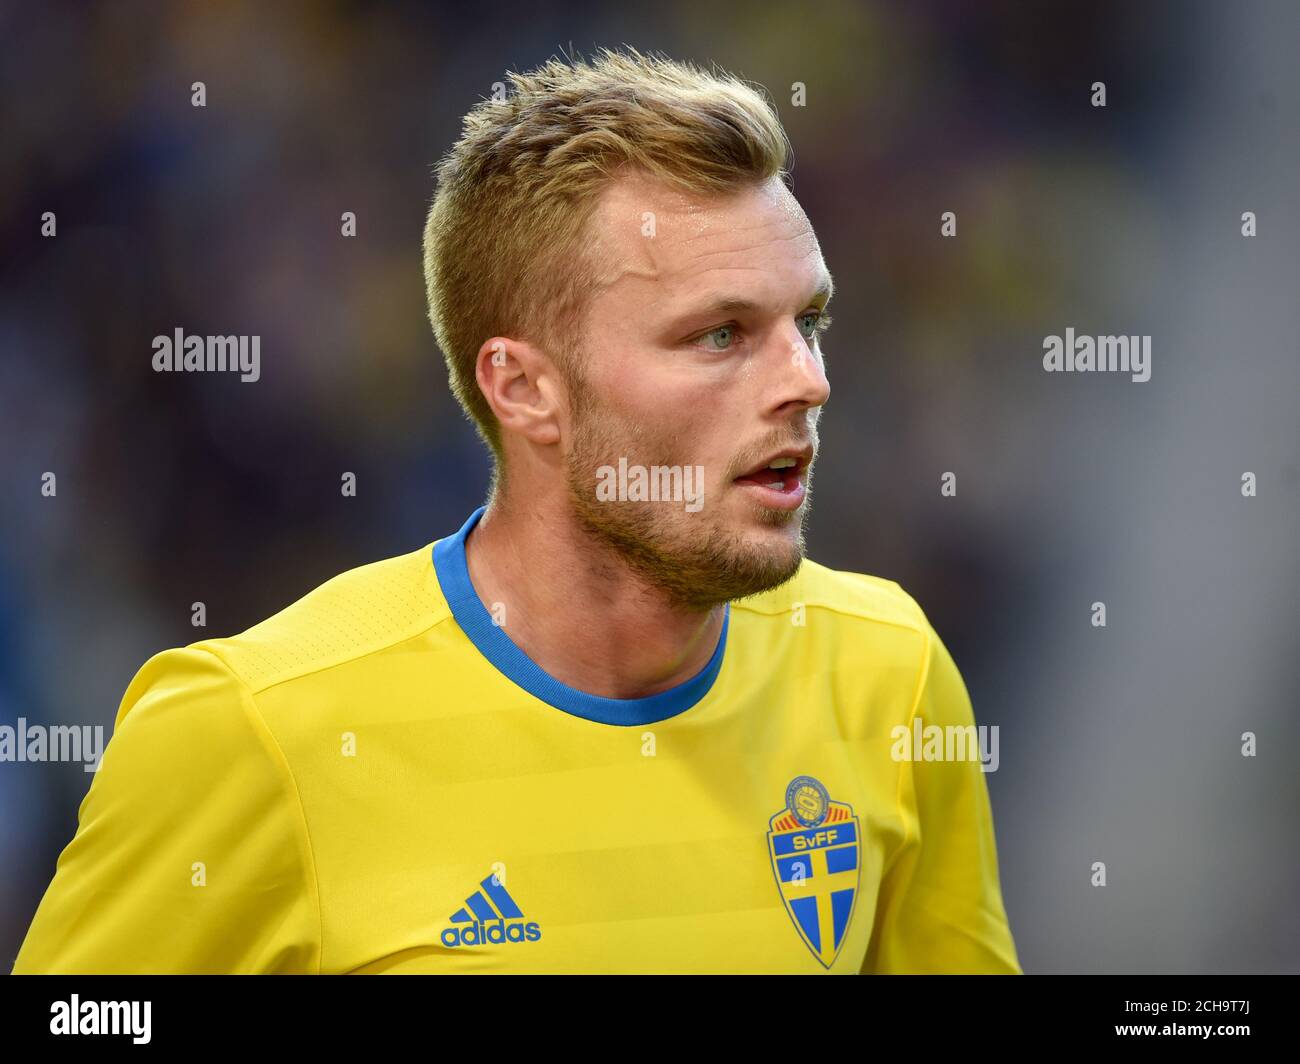 Sweden's Sebastian Larsson during the International Friendly match at the Friends Arena, Stockholm. PRESS ASSOCIATION Photo. Picture date: Sunday June 5, 2016. See PA story soccer Sweden. Photo credit should read: Joe Giddens/PA Wire. RESTRICTIONS: Editorial use only, No commercial use without prior permission, please contact PA Images for further information: Tel: +44 (0) 115 8447447. Stock Photo